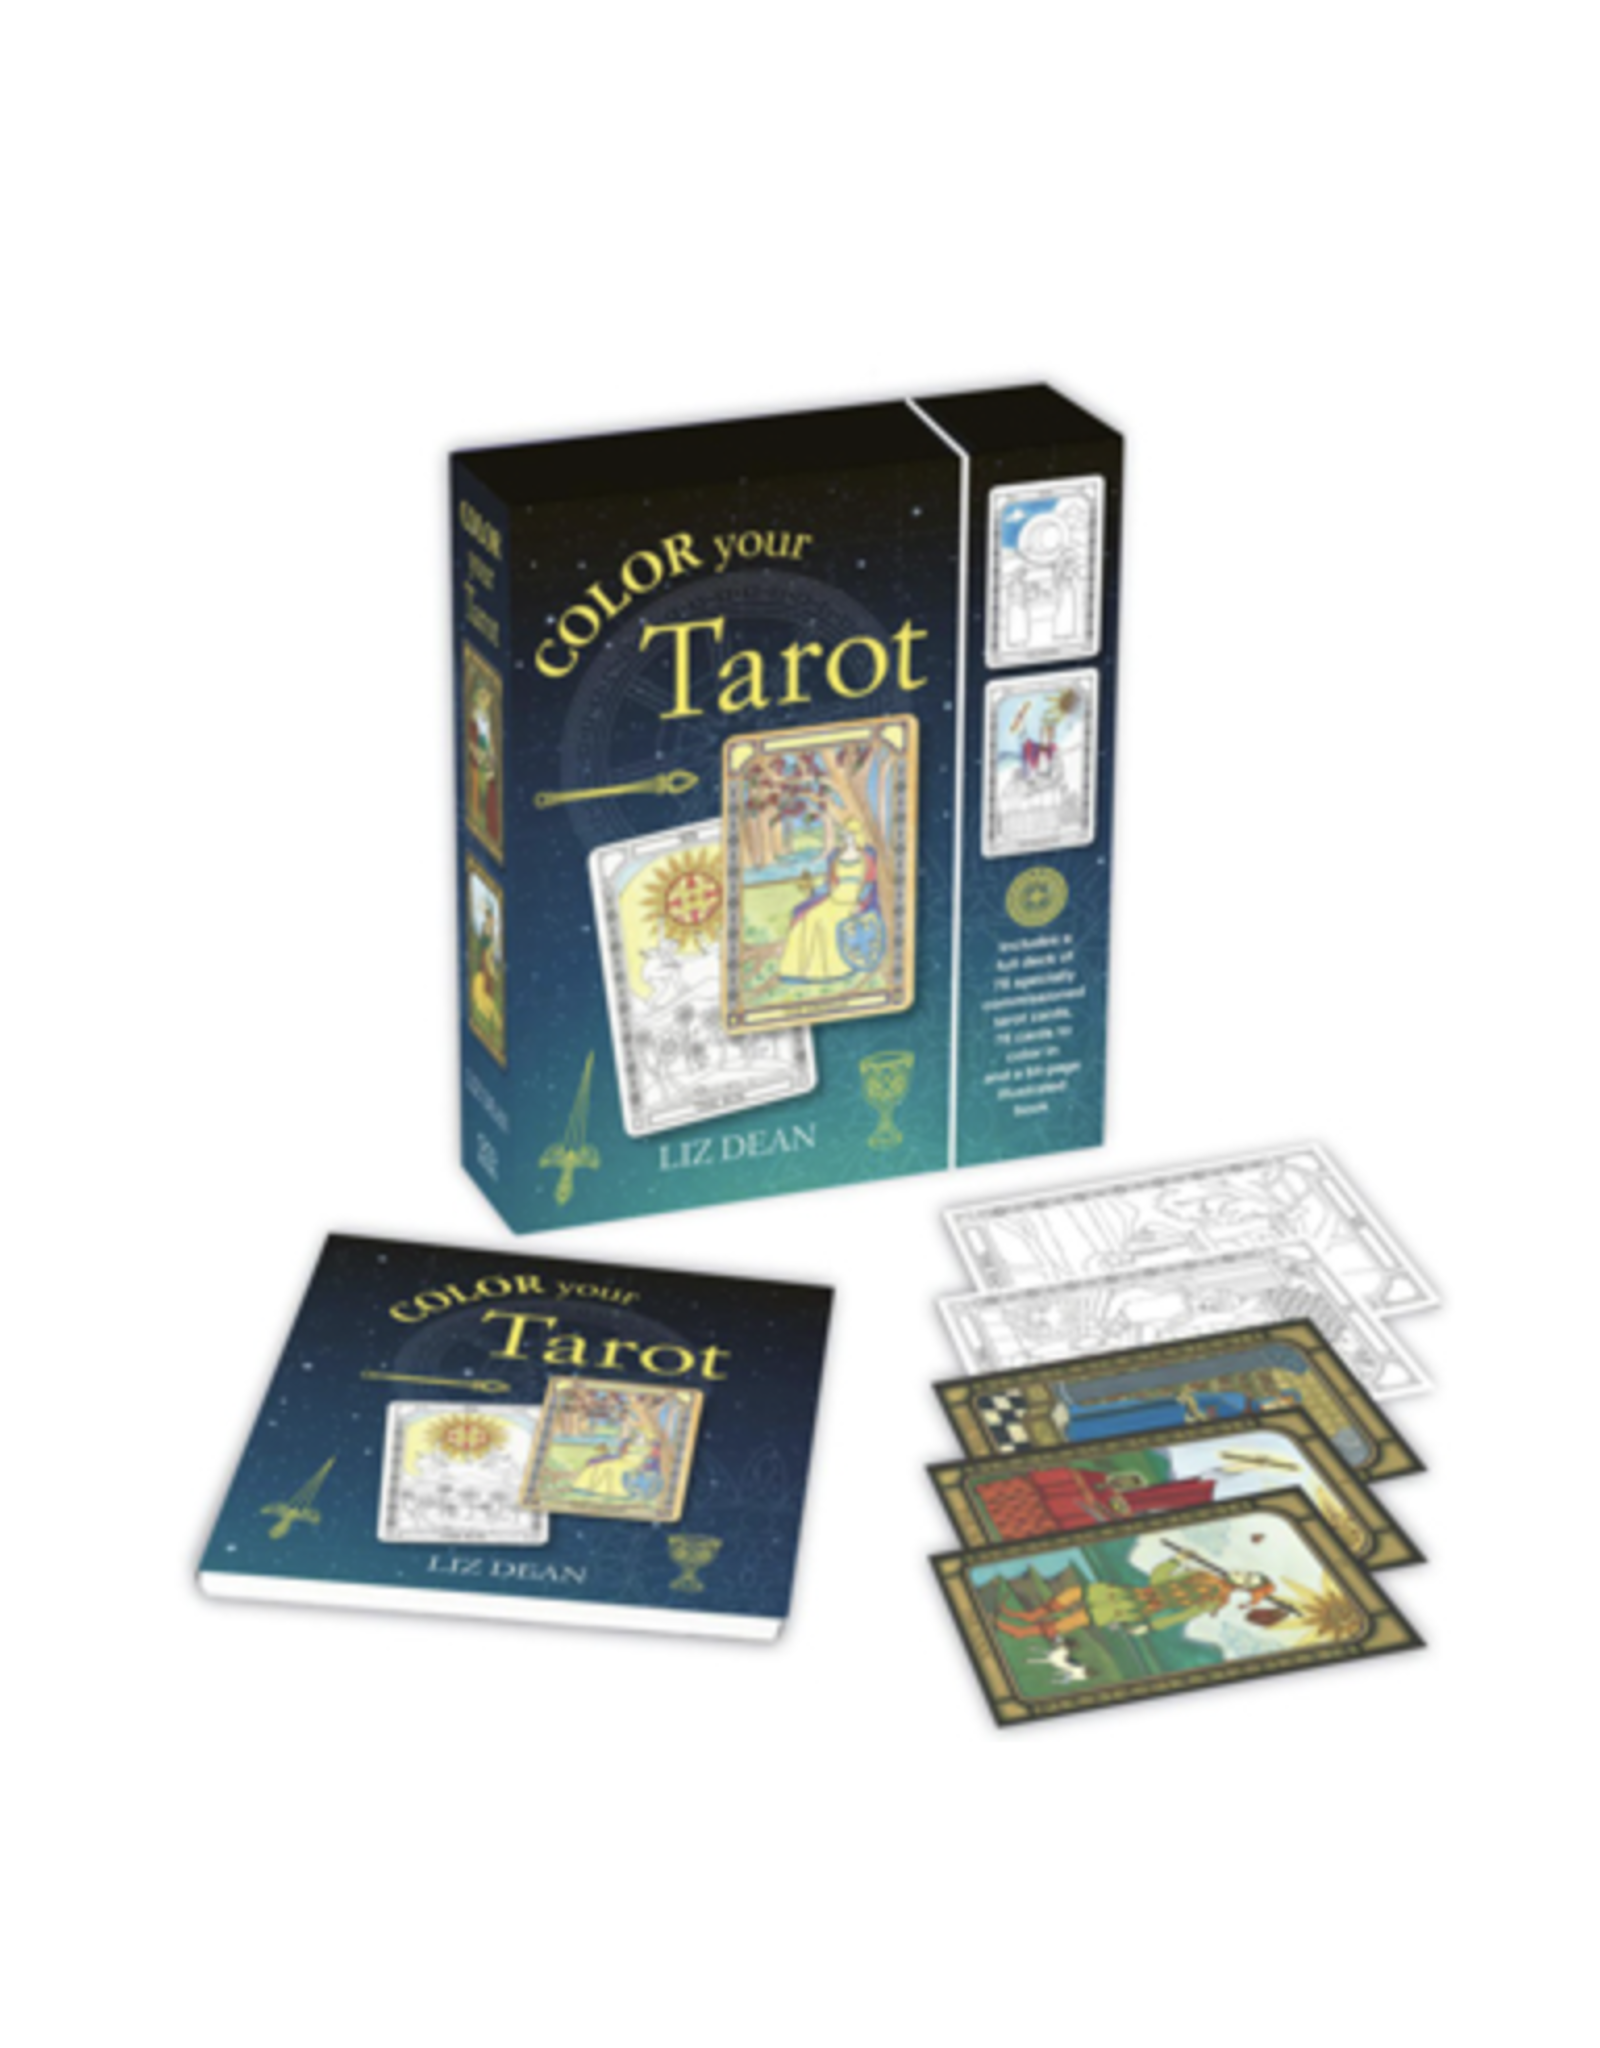 Color Your Tarot Set (September 2022) Includes a full deck of specially commissioned tarot cards, a deck of cards to colour in, and a 64-page illustrated book